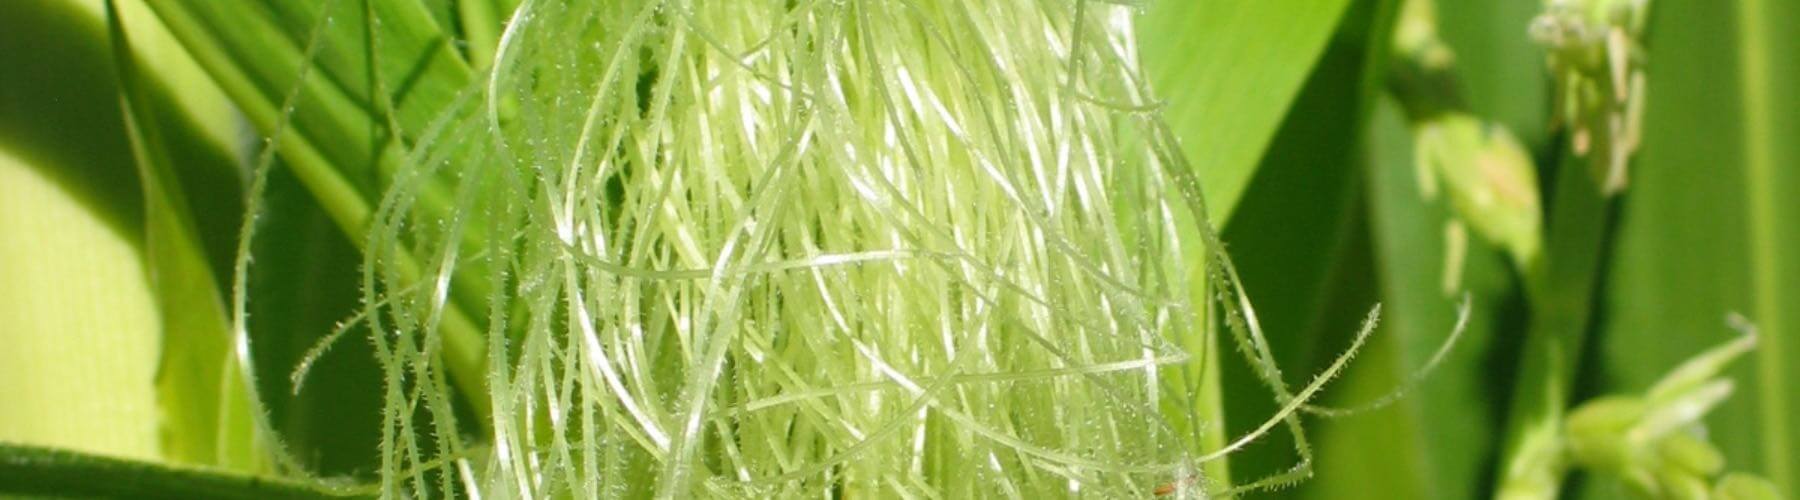 🌾🌽Corn silk: a natural agent for medicine., Babaroots 🍀☘️🌿🌱 posted on  the topic